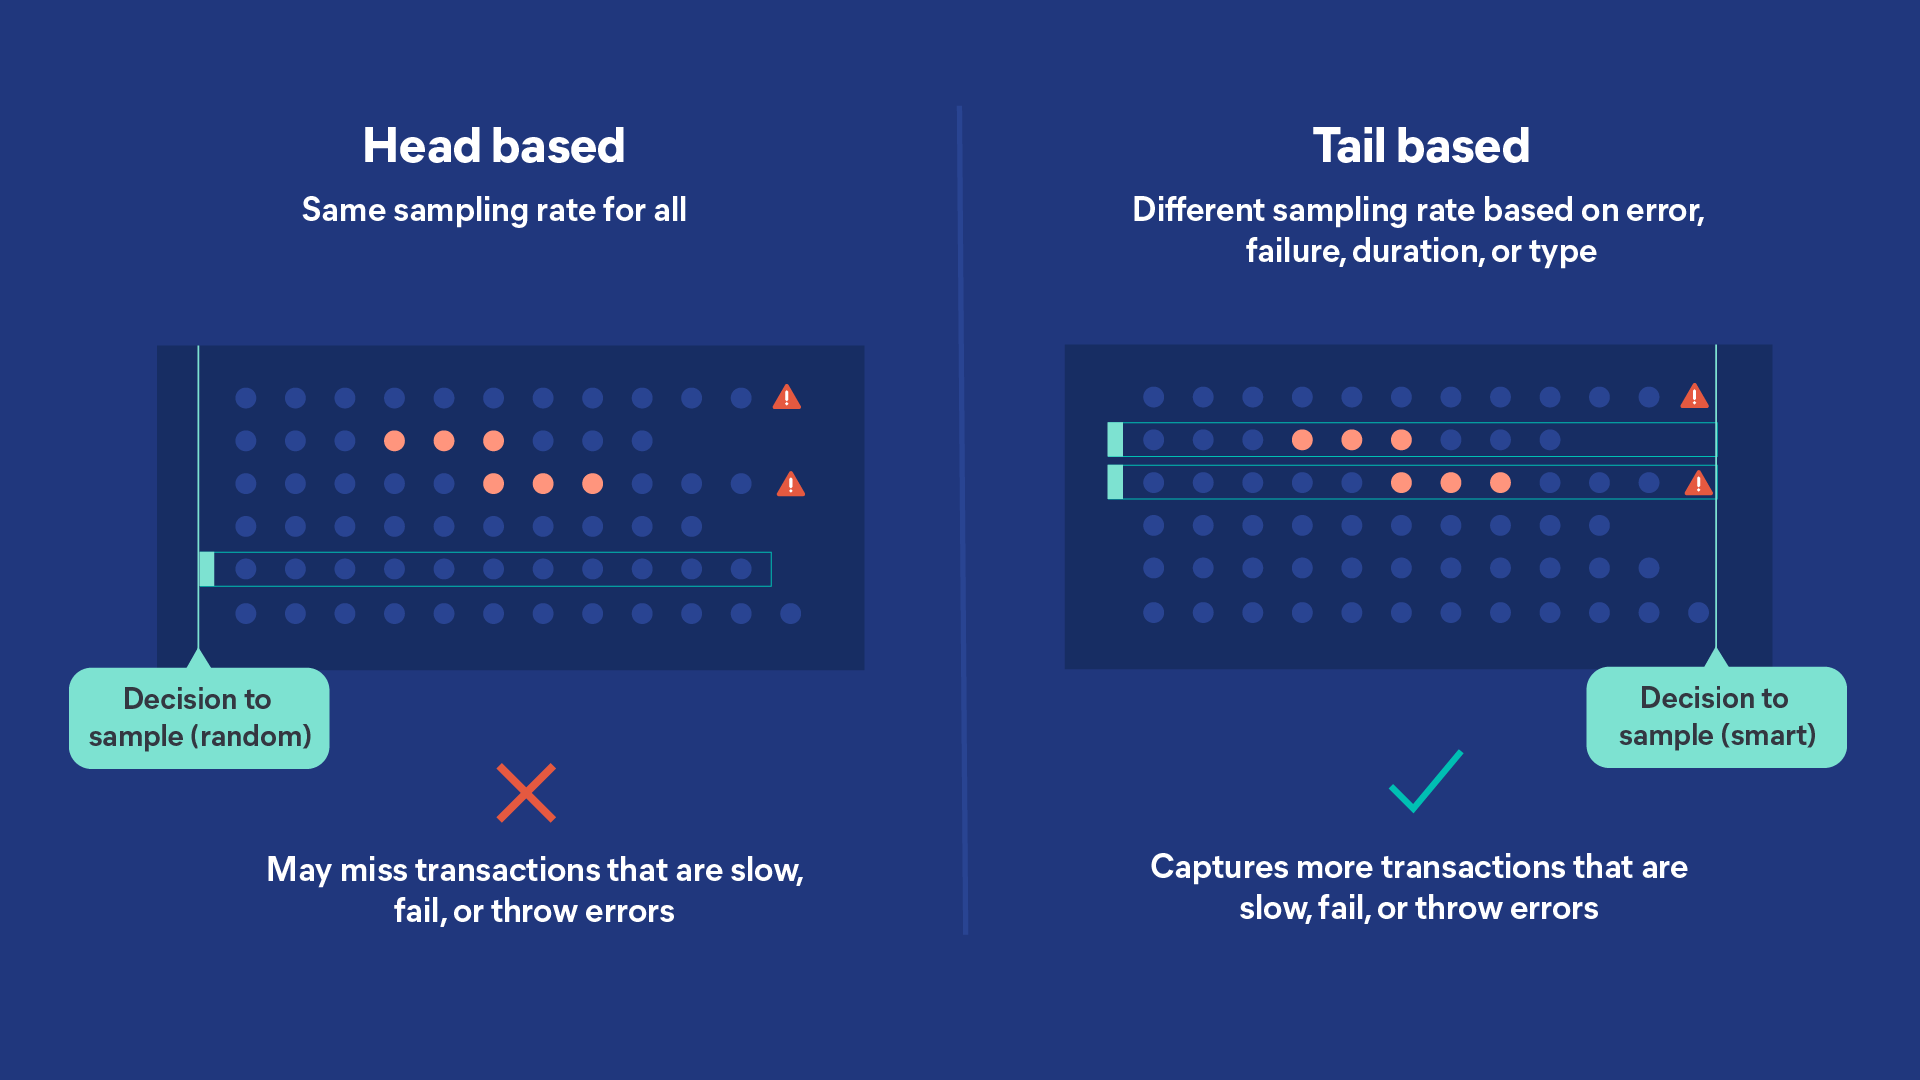 With tail-based sampling, the decision to sample is made after the transaction completes. As such, different sampling rates may be applied based on transaction duration, failure or success, and a higher proportion of “interesting” transactions can be captured.